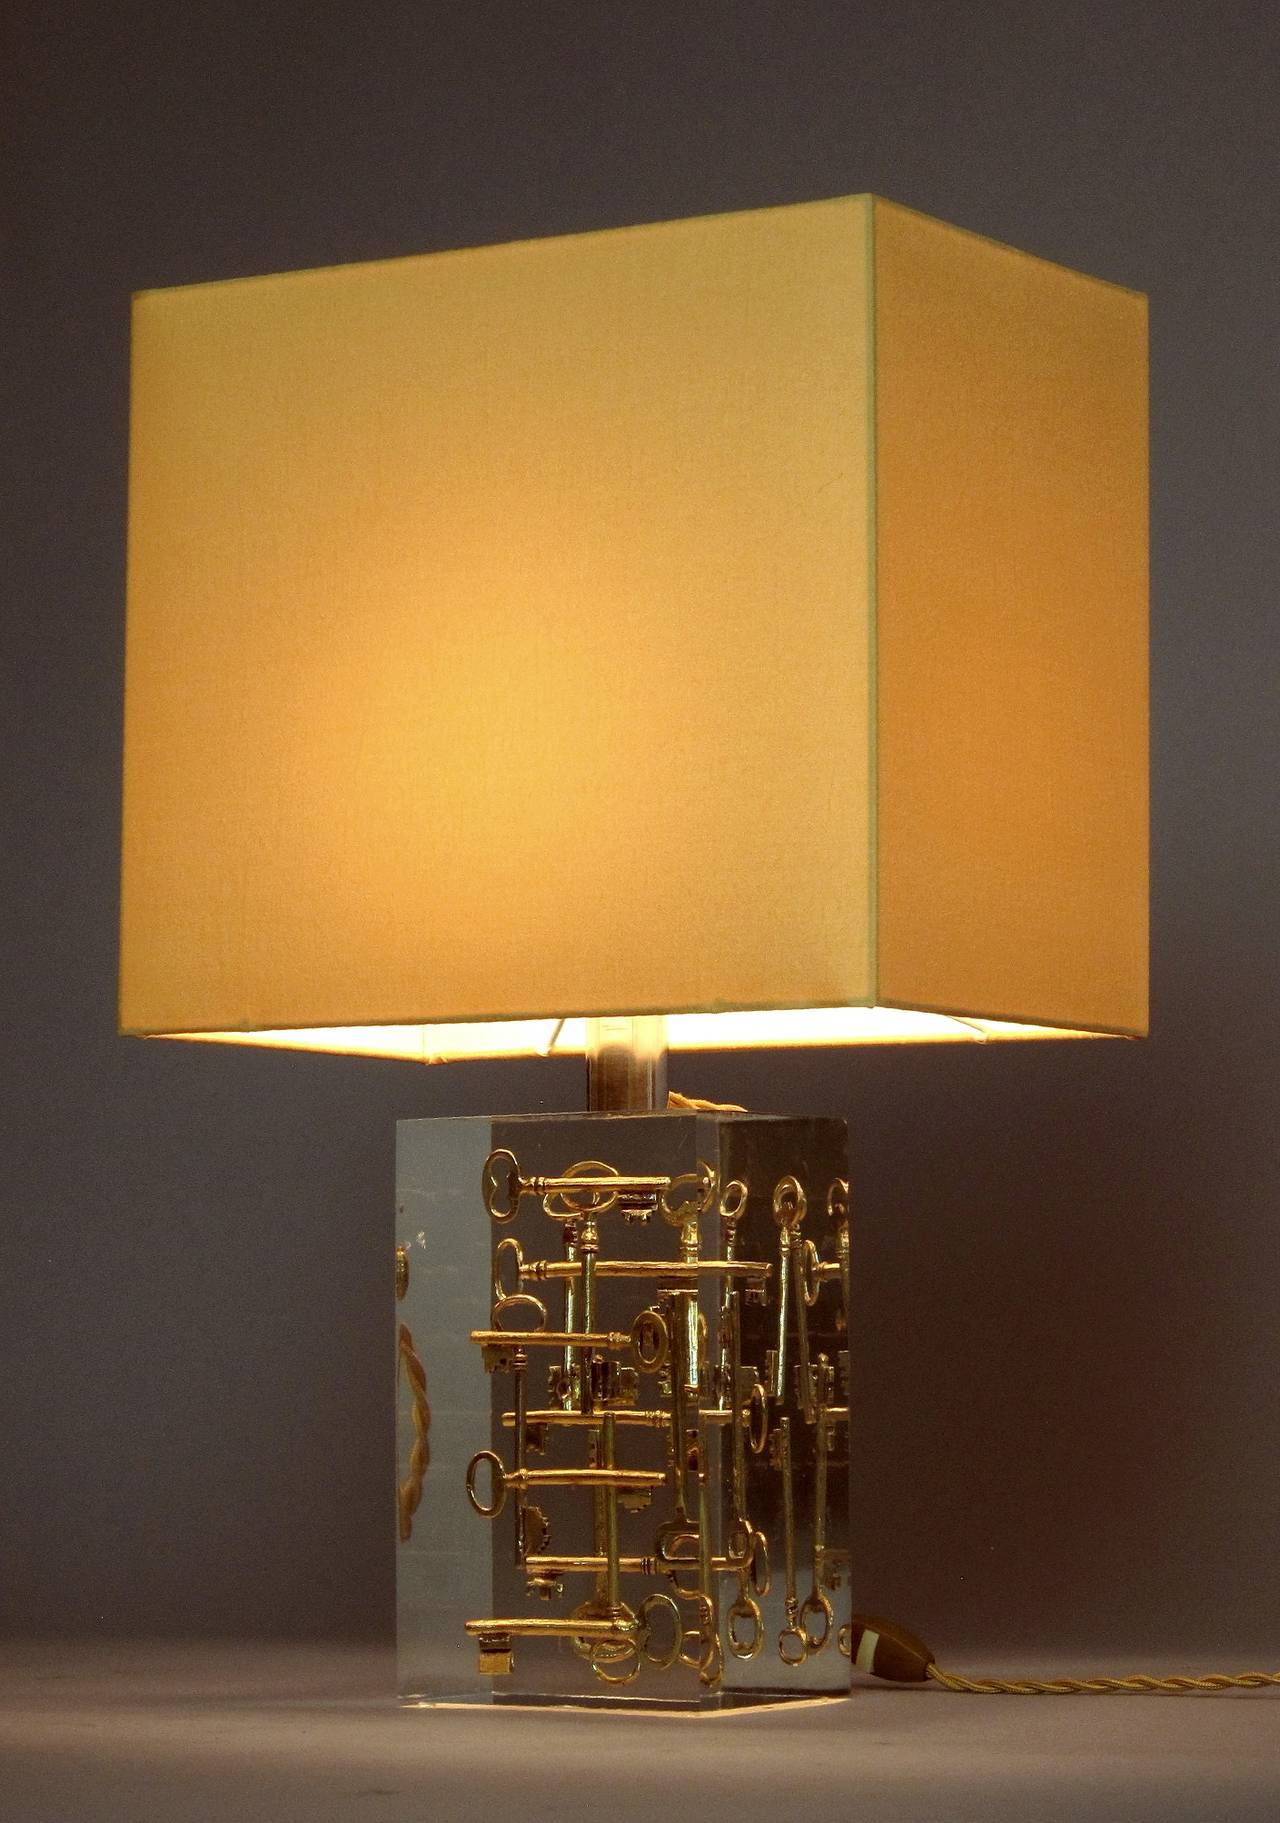 Brass keys molded in Lucite and a golden shade for a warm soft light, this
lamp sculpture was manufactured by Thierry Wintrebert in France, 1980s,
restored.